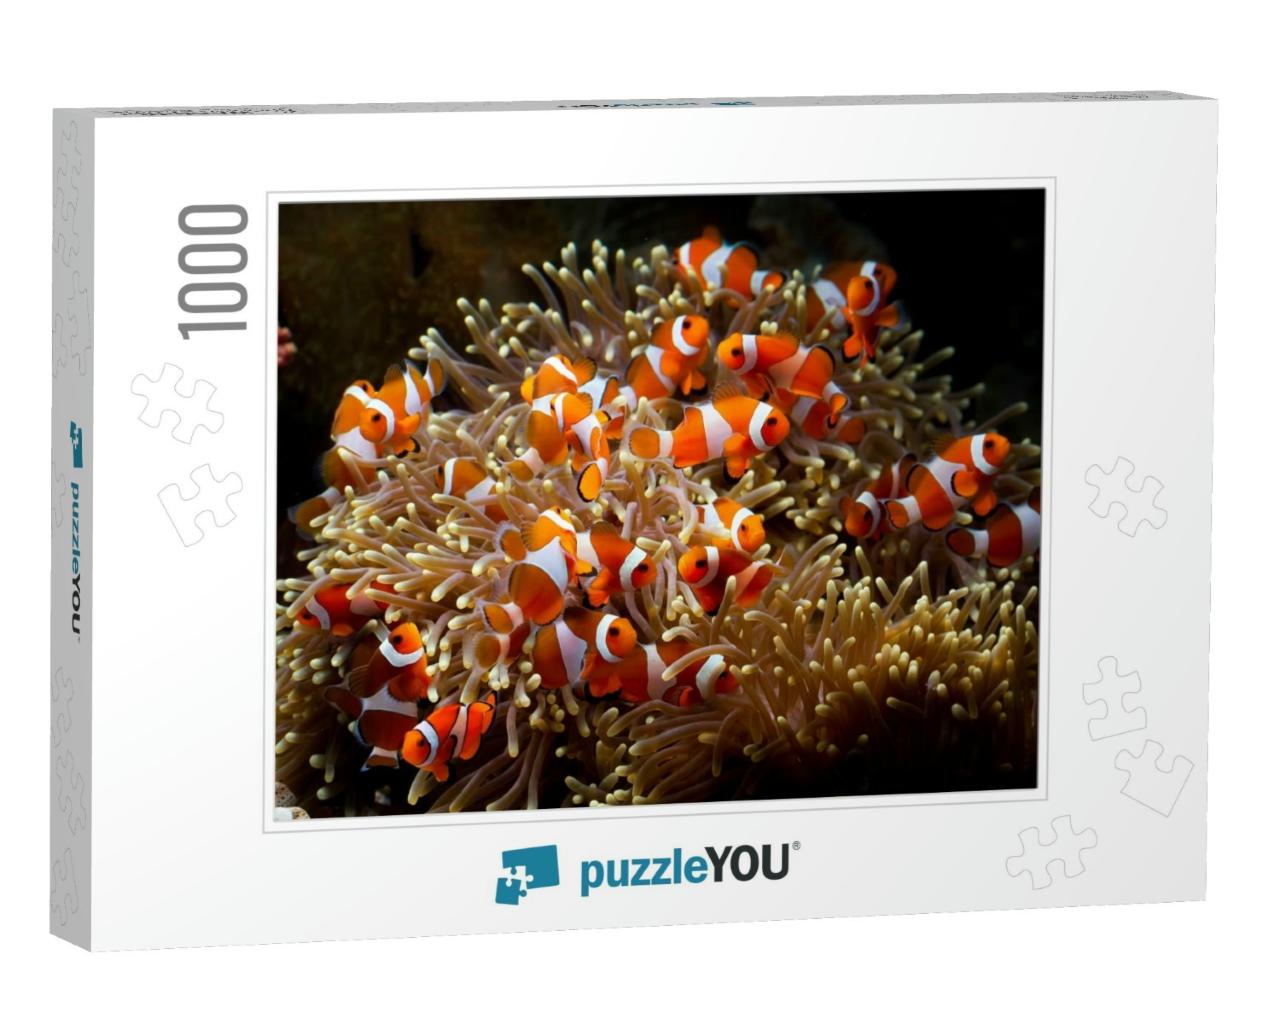 Cute Anemone Fish Playing on the Coral Reef, Beautiful Co... Jigsaw Puzzle with 1000 pieces